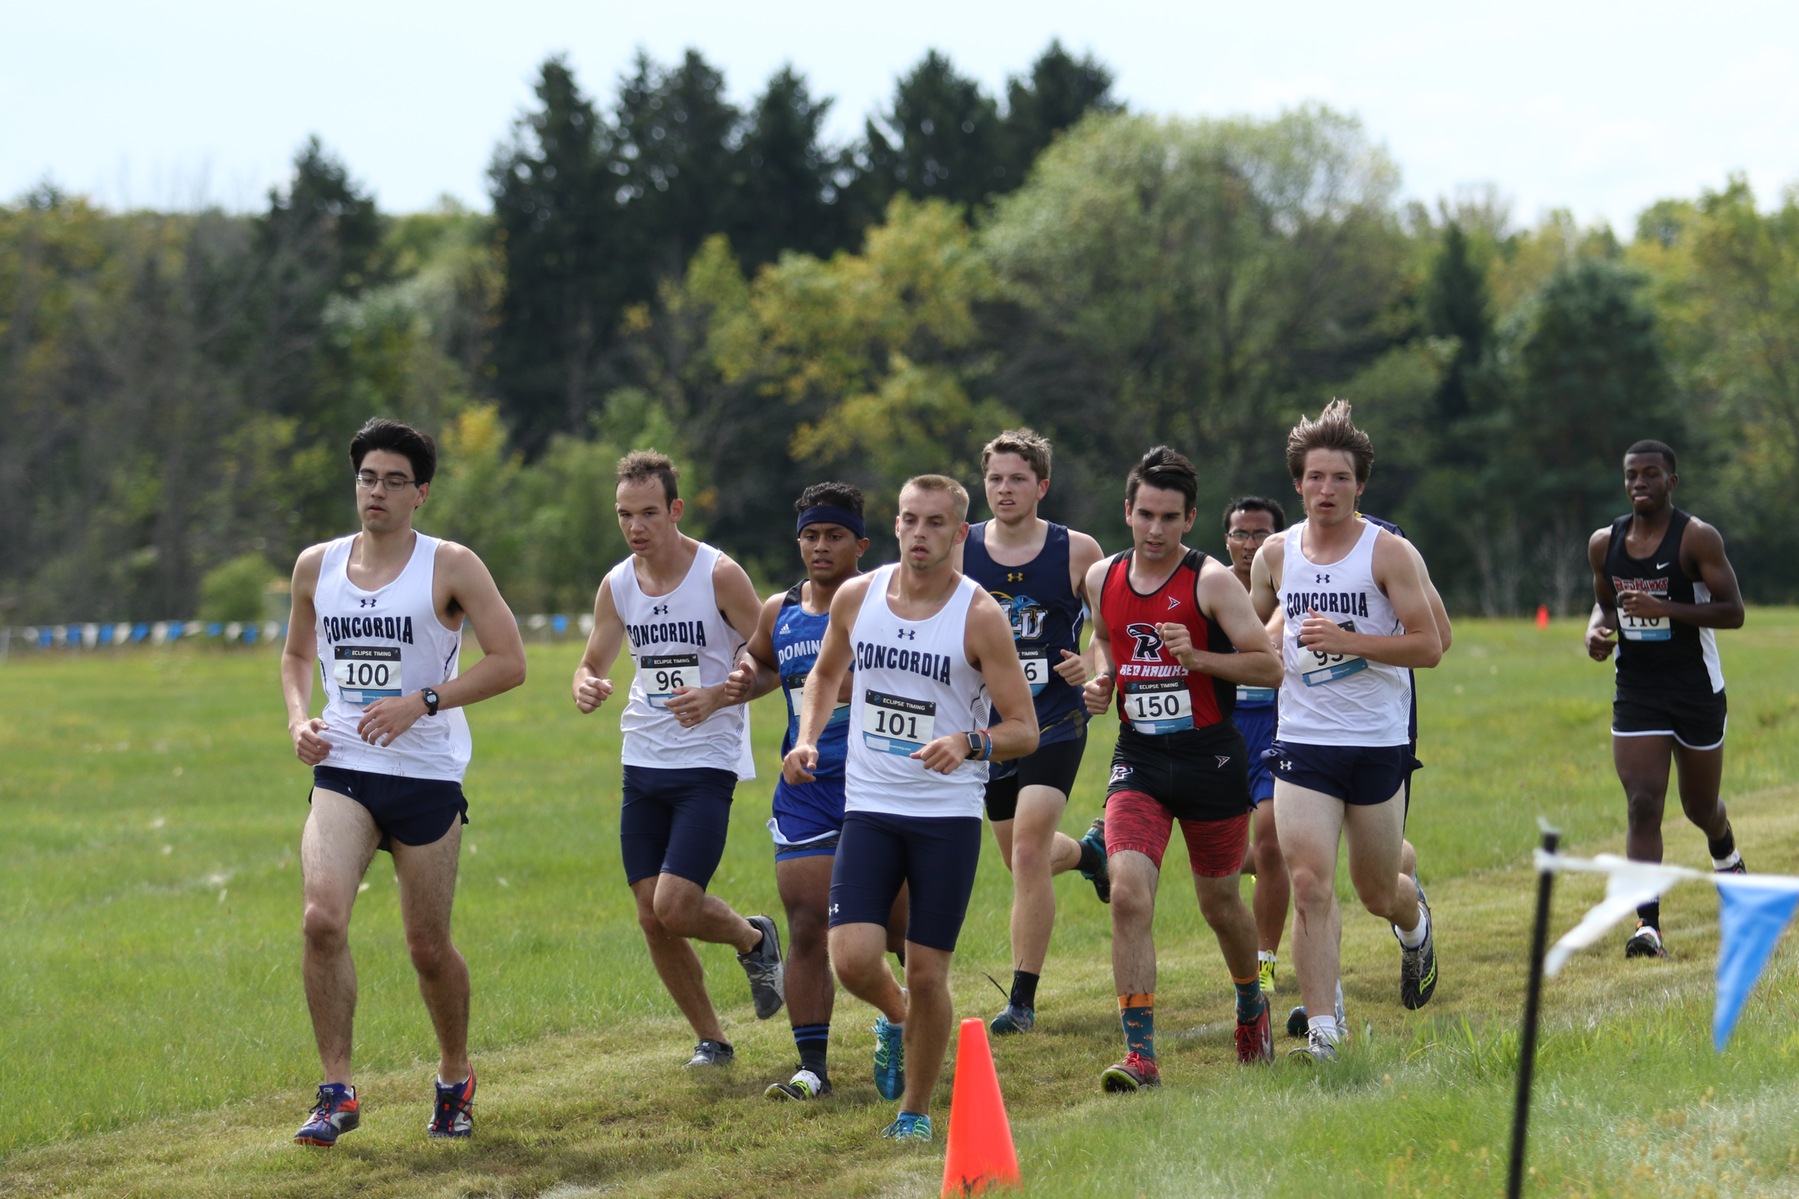 Men’s Cross Country will compete at NACC Championships